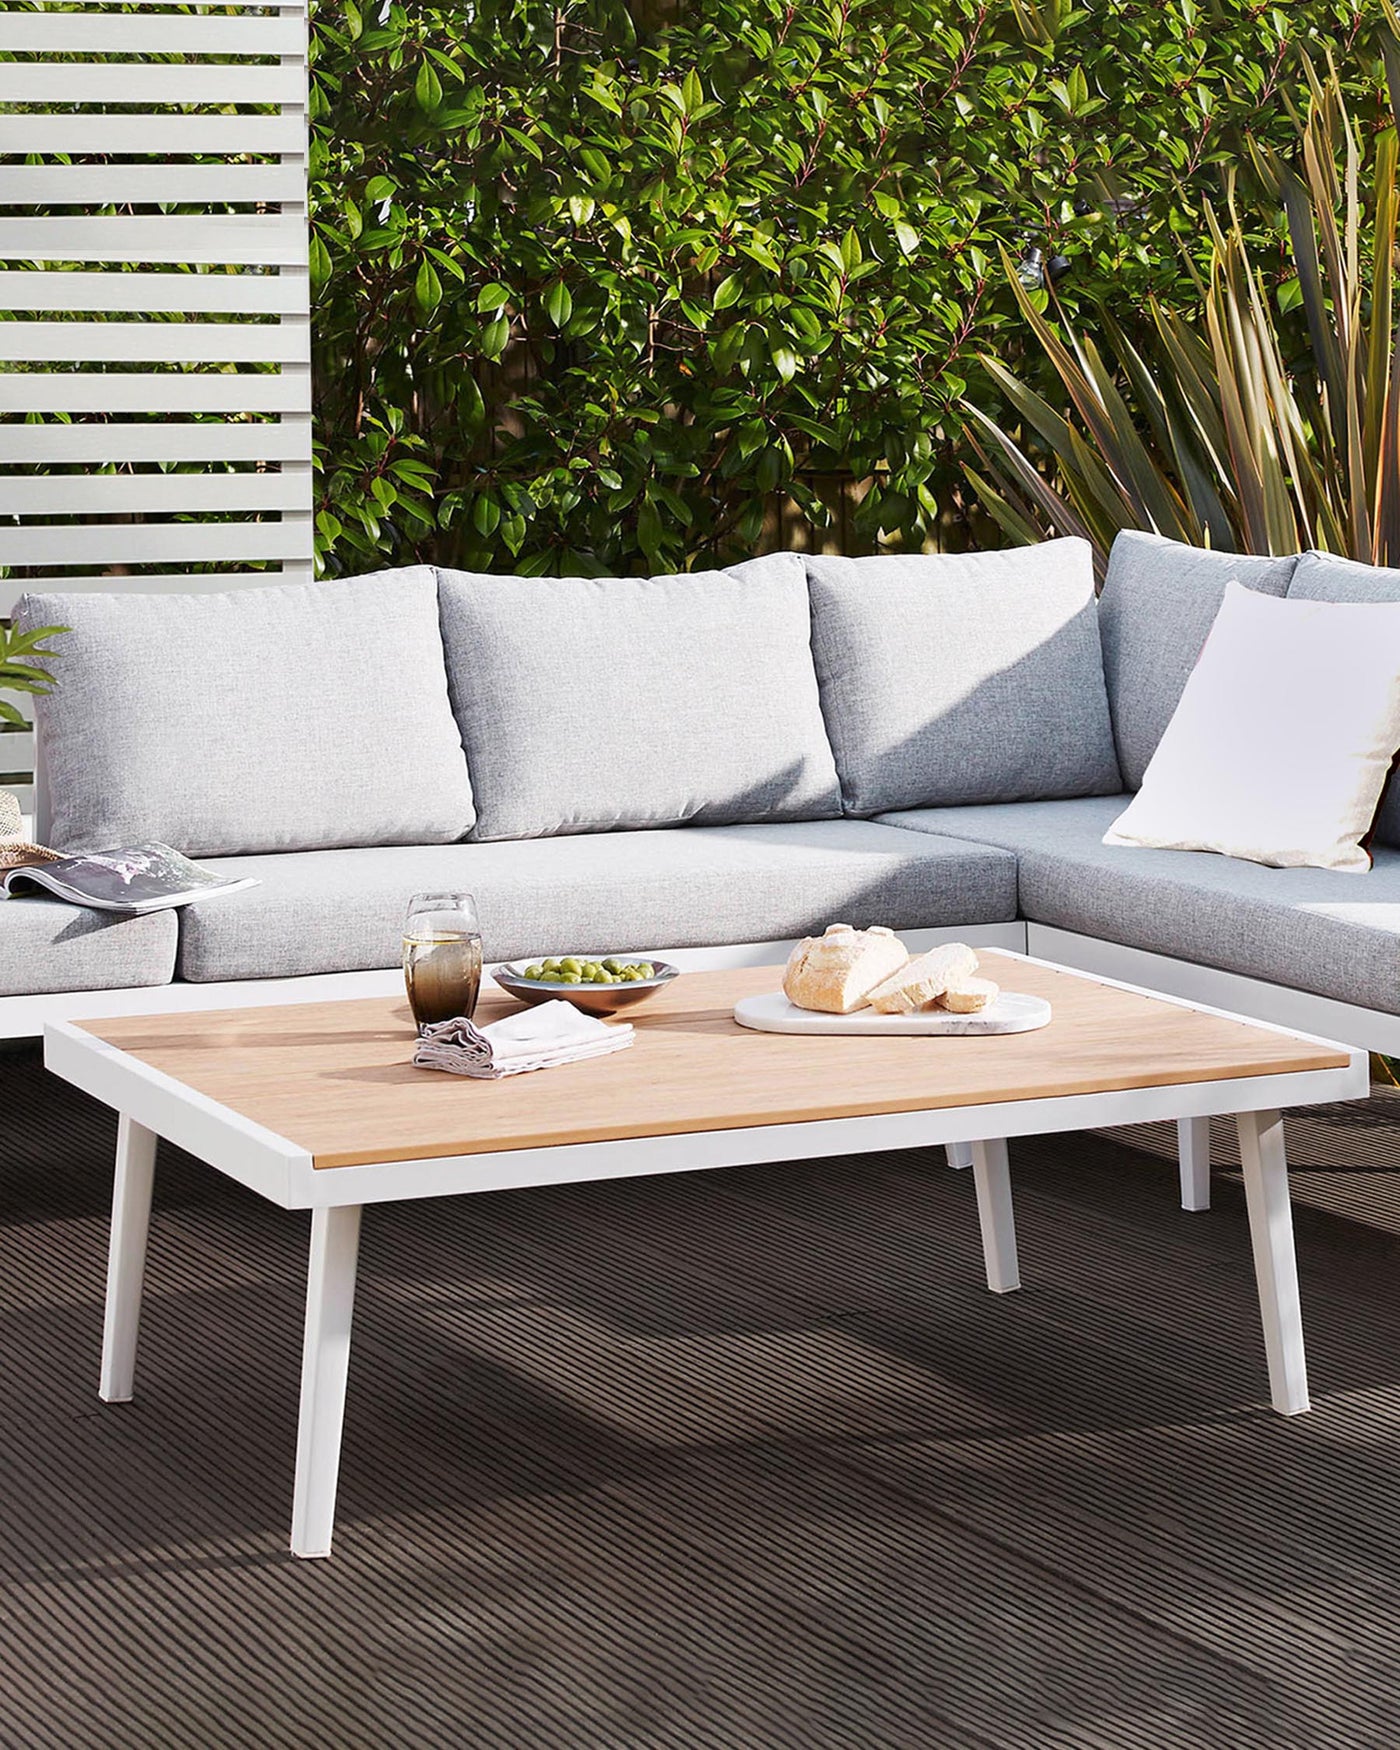 Modern outdoor furniture set consisting of a sectional corner sofa with light grey cushions and white throw pillows, accompanied by a rectangular coffee table with a white base and a wooden top. The set is showcased on an outdoor patio with a backdrop of green foliage.